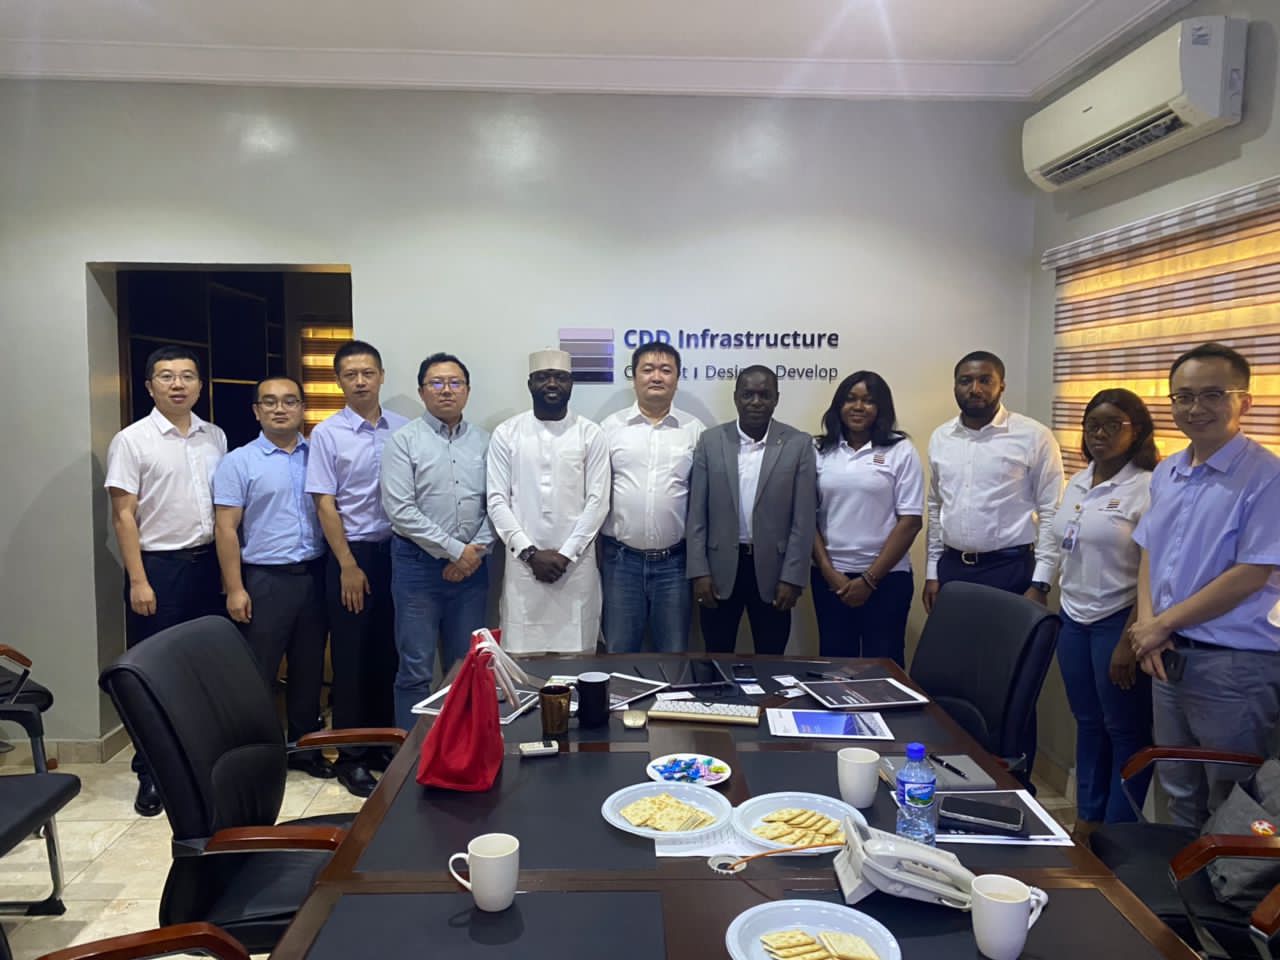 Macosine and Techen team visits the CDD Infrastructure